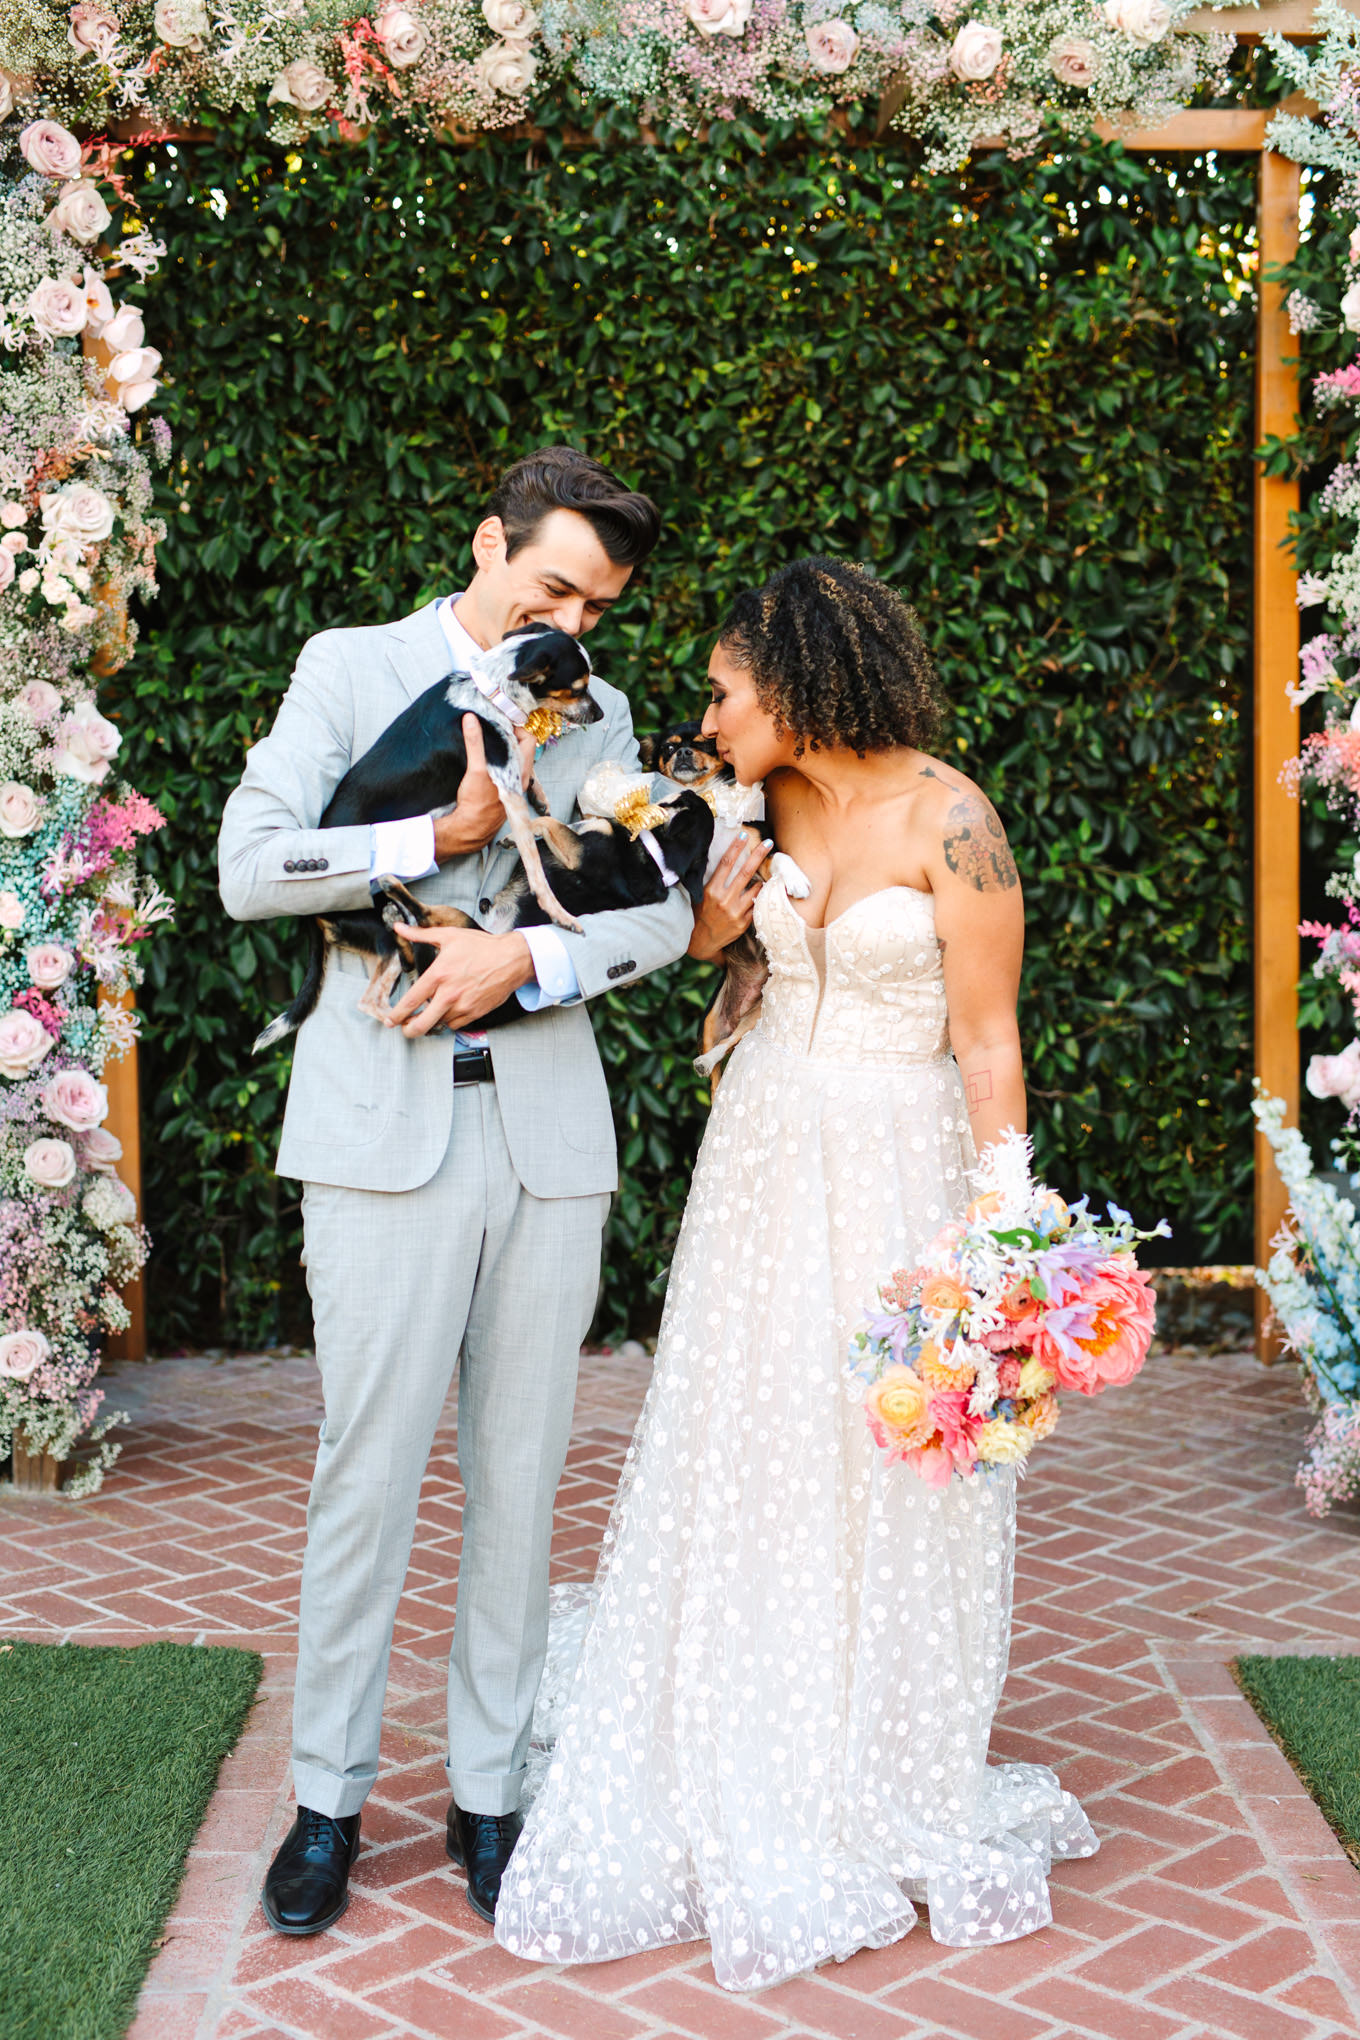 Bride and groom with their three dogs | Colorful pop-up micro wedding at The Ruby Street Los Angeles featured on Green Wedding Shoes | Colorful and elevated photography for fun-loving couples in Southern California | #colorfulwedding #popupwedding #weddingphotography #microwedding Source: Mary Costa Photography | Los Angeles